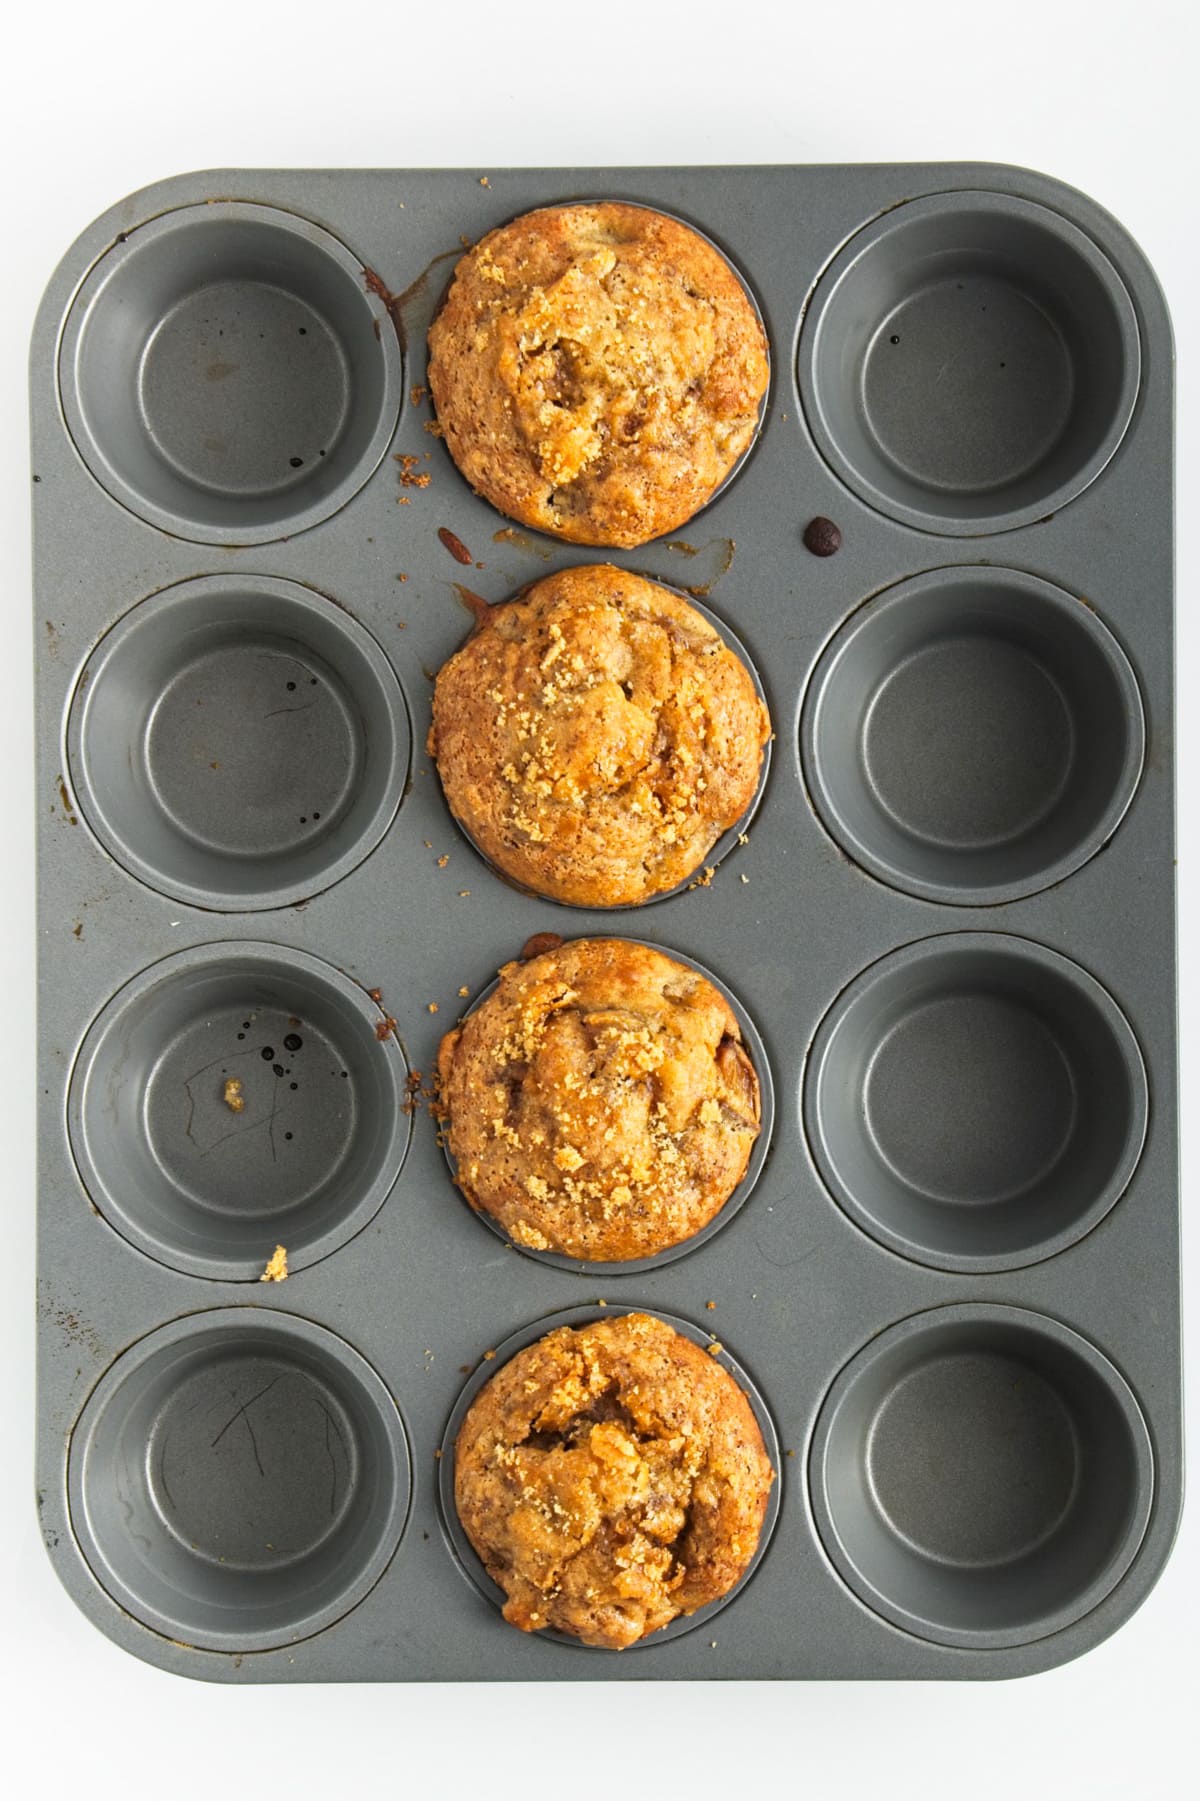 Four golden brown and well risen peach muffins.